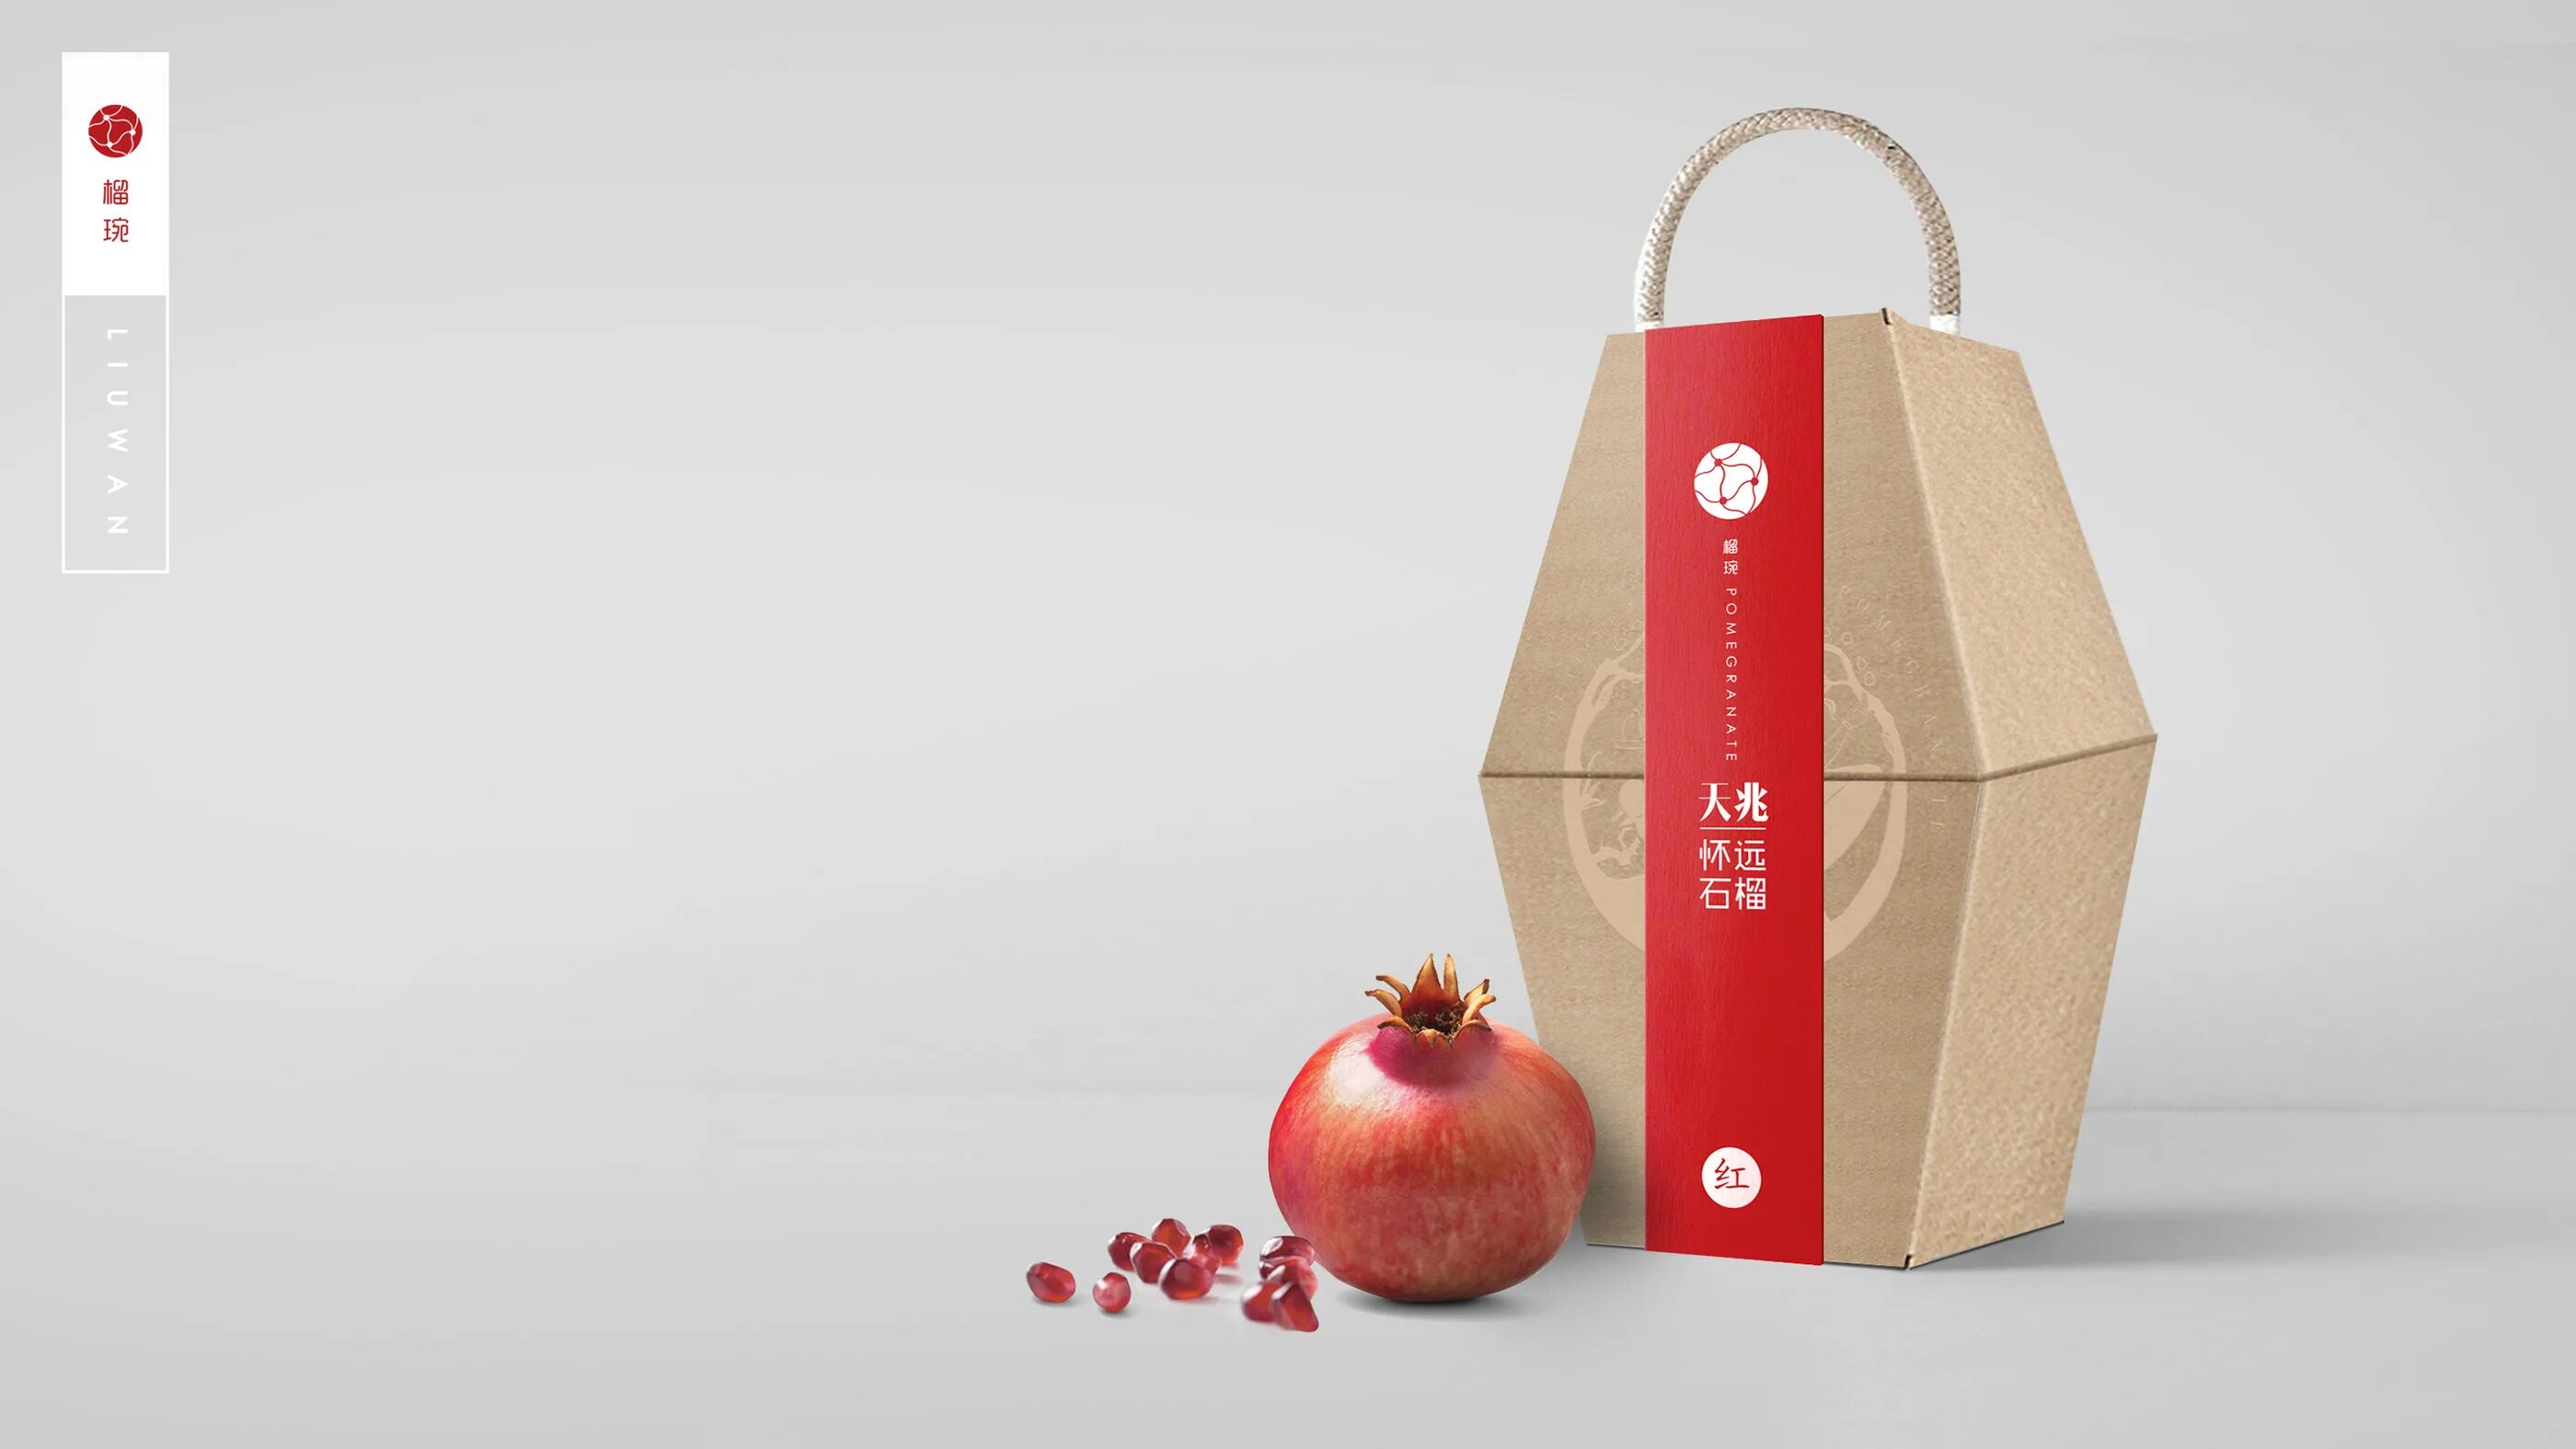 Without packaging. Pomegranate Packaging. Package logo Design. Packing logo Design. Packages with logo.